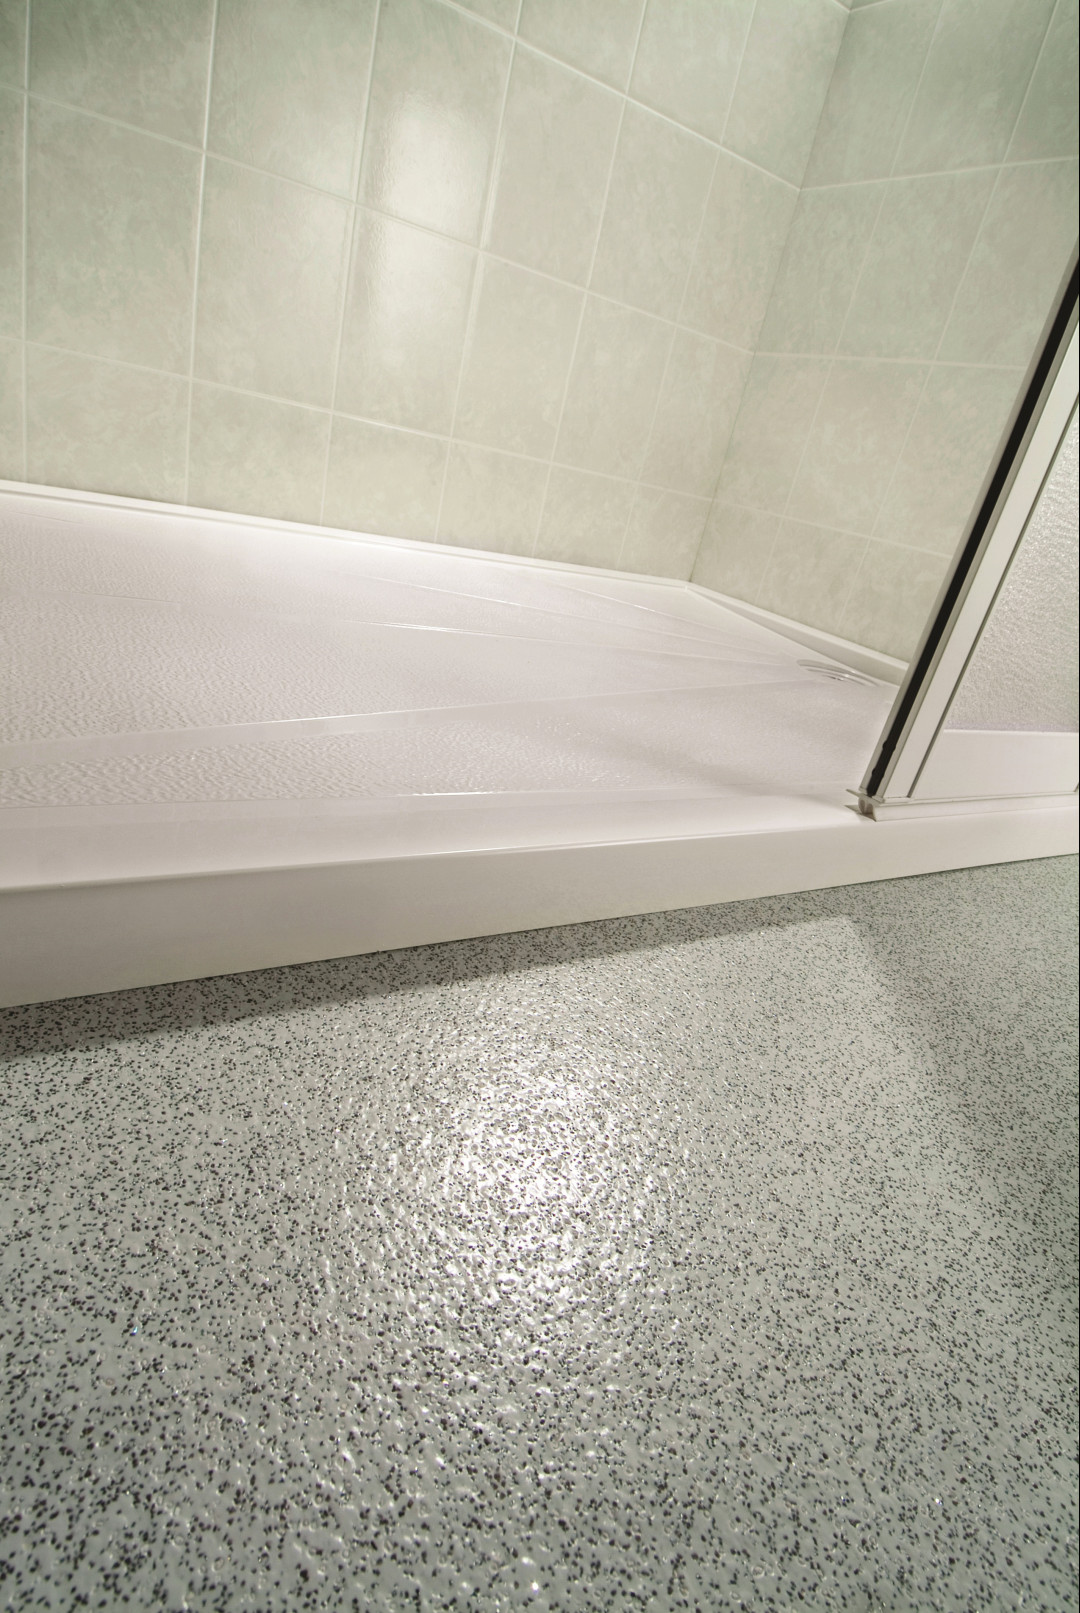 Easibathe 4 Sided Low Level Access Shower Tray